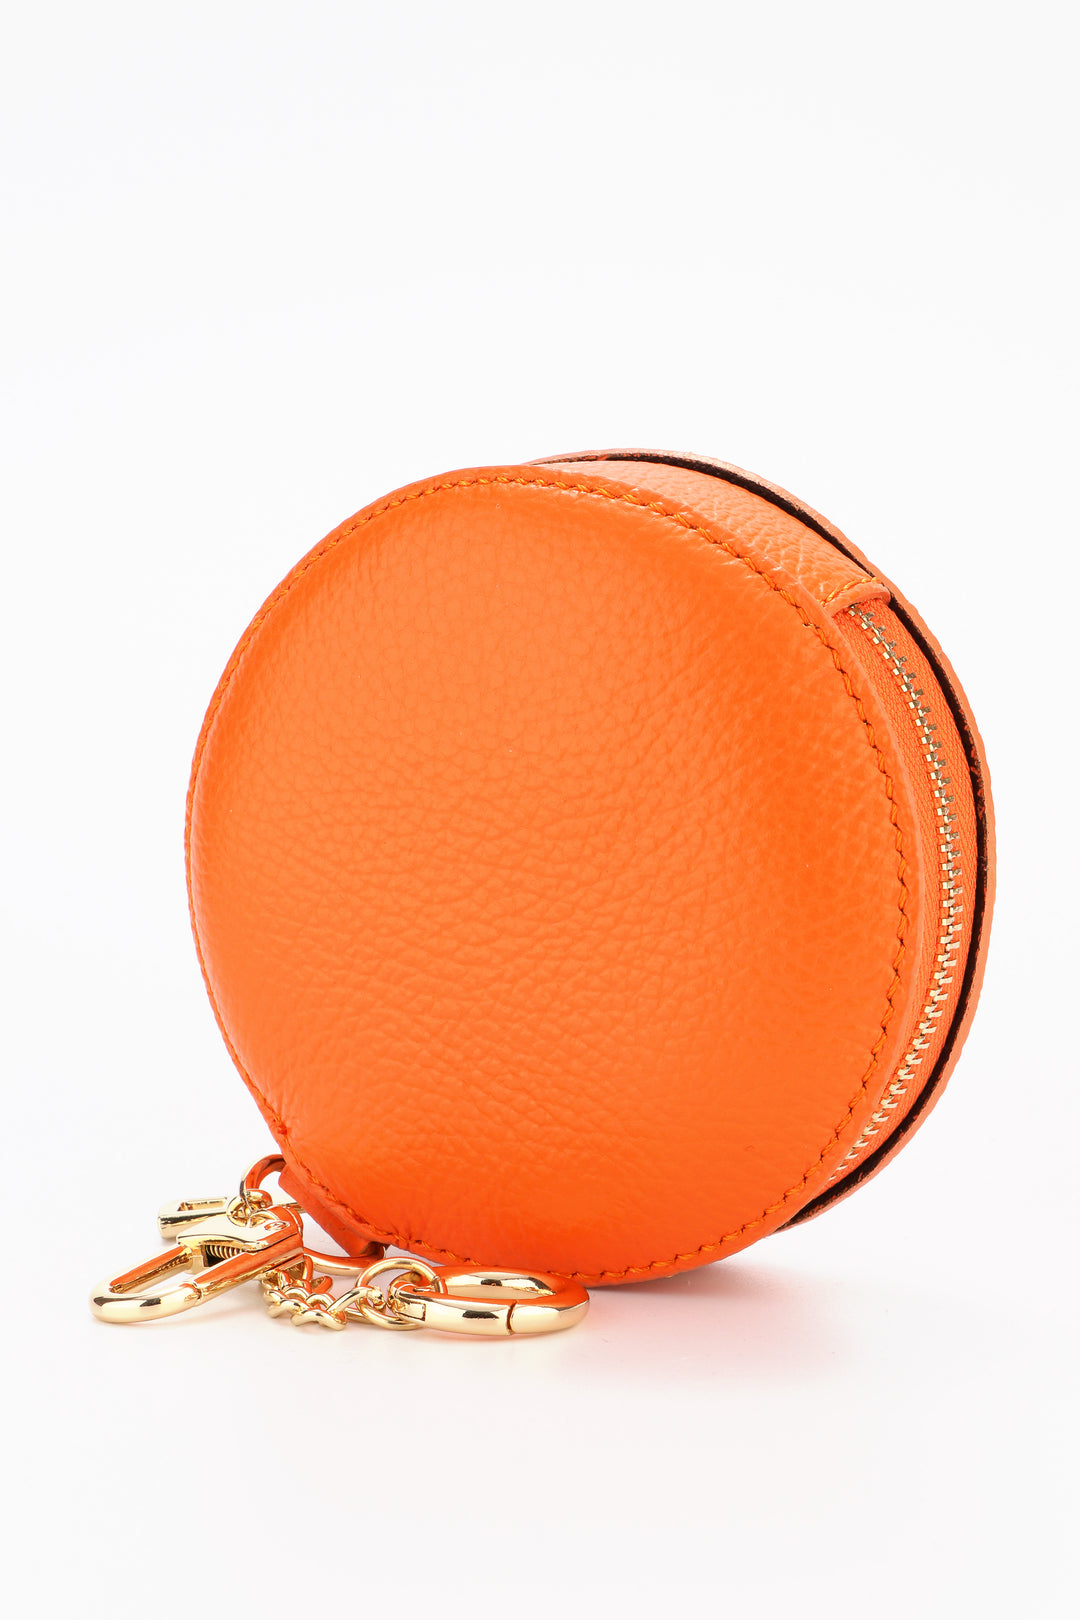 orange leather round clip on coin purse with a zip closure and two gold attachment keyrings